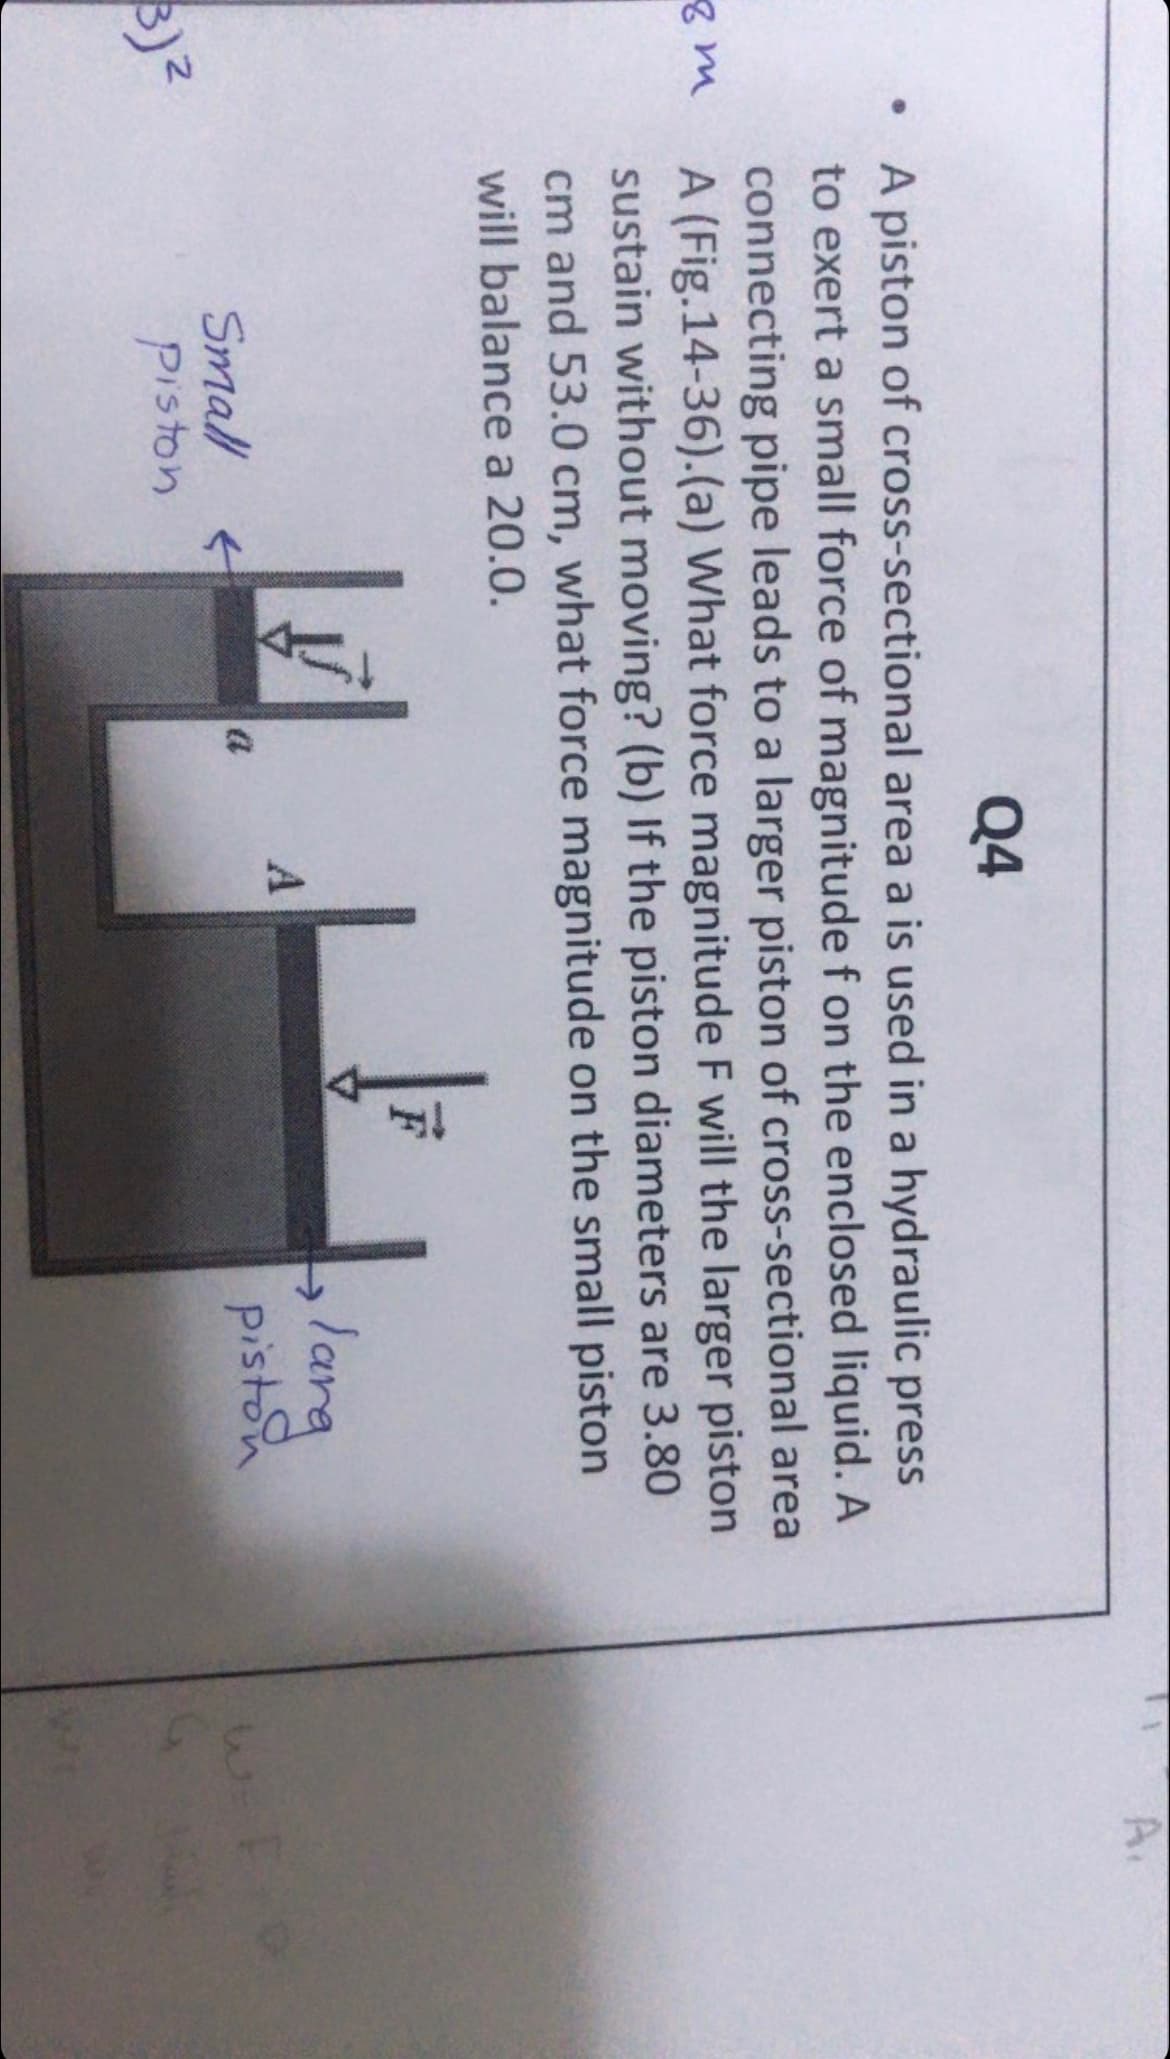 A.
Q4
A piston of cross-sectional area a is used in a hydraulic press
to exert a small force of magnitude f on the enclosed liquid. A
connecting pipe leads to a larger piston of cross-sectional area
A (Fig.14-36).(a) What force magnitude F will the larger piston
sustain without moving? (b) If the piston diameters are 3.80
cm and 53.0 cm, what force magnitude on the small piston
will balance a 20.0.
larg
piston
->
Small
piston
a
